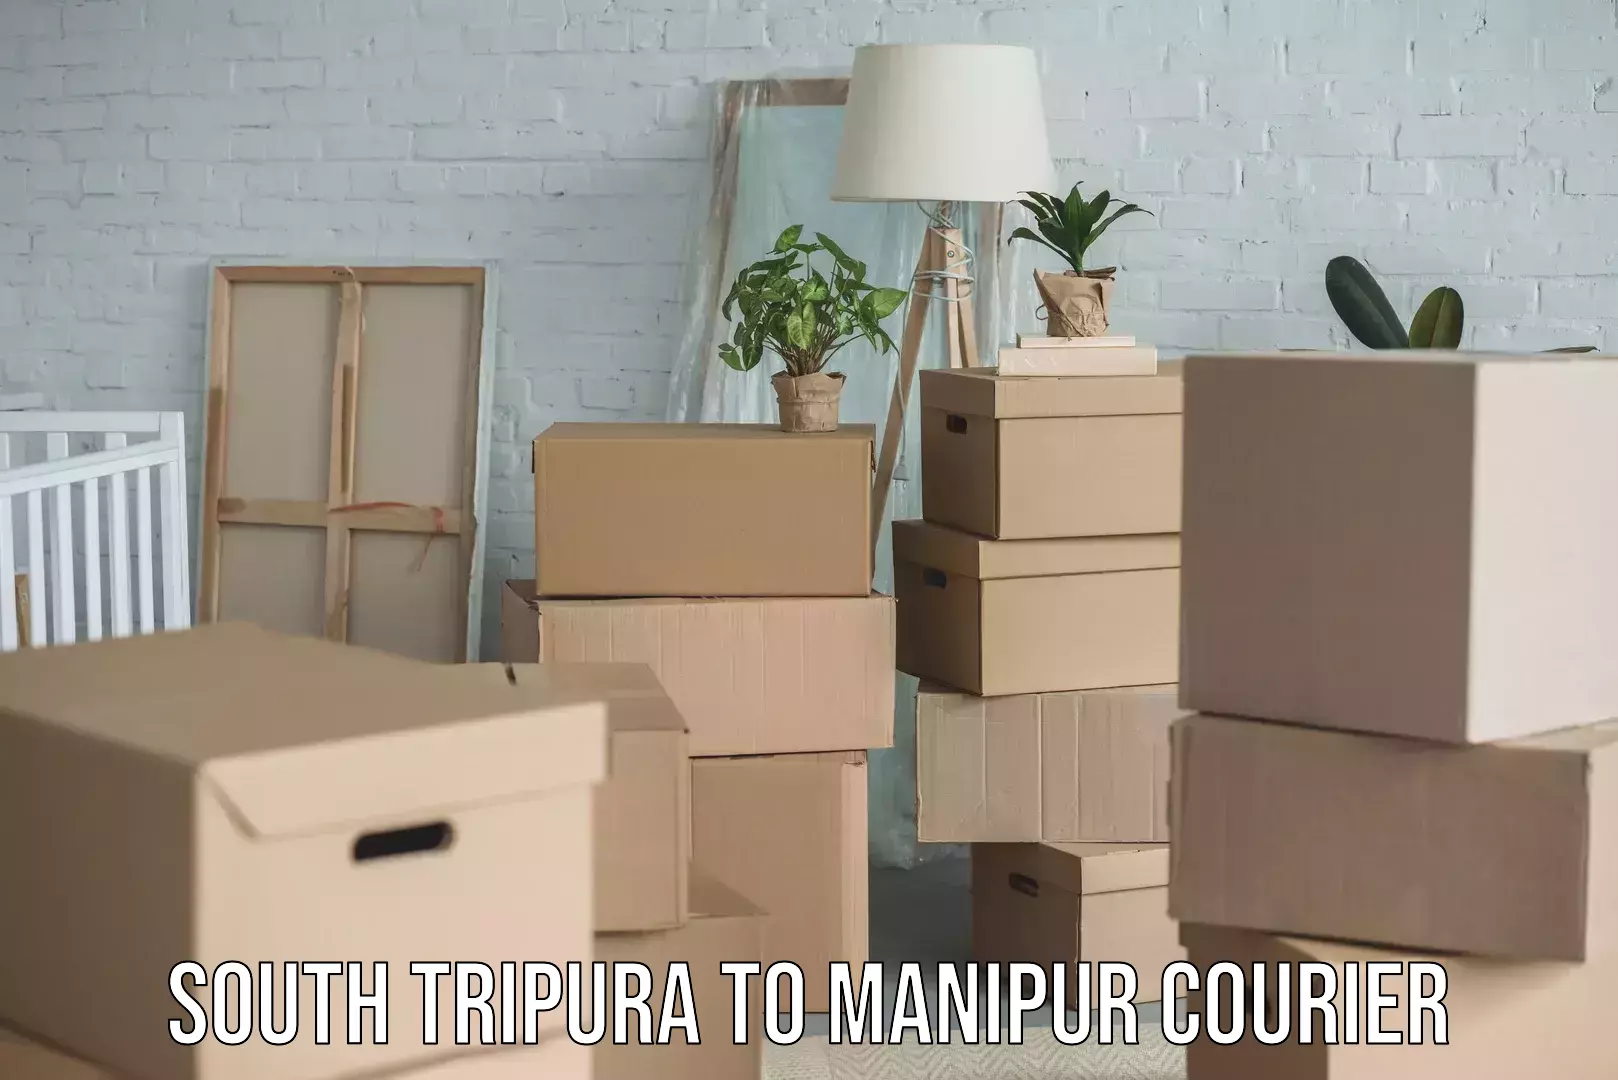 Affordable parcel service South Tripura to Manipur